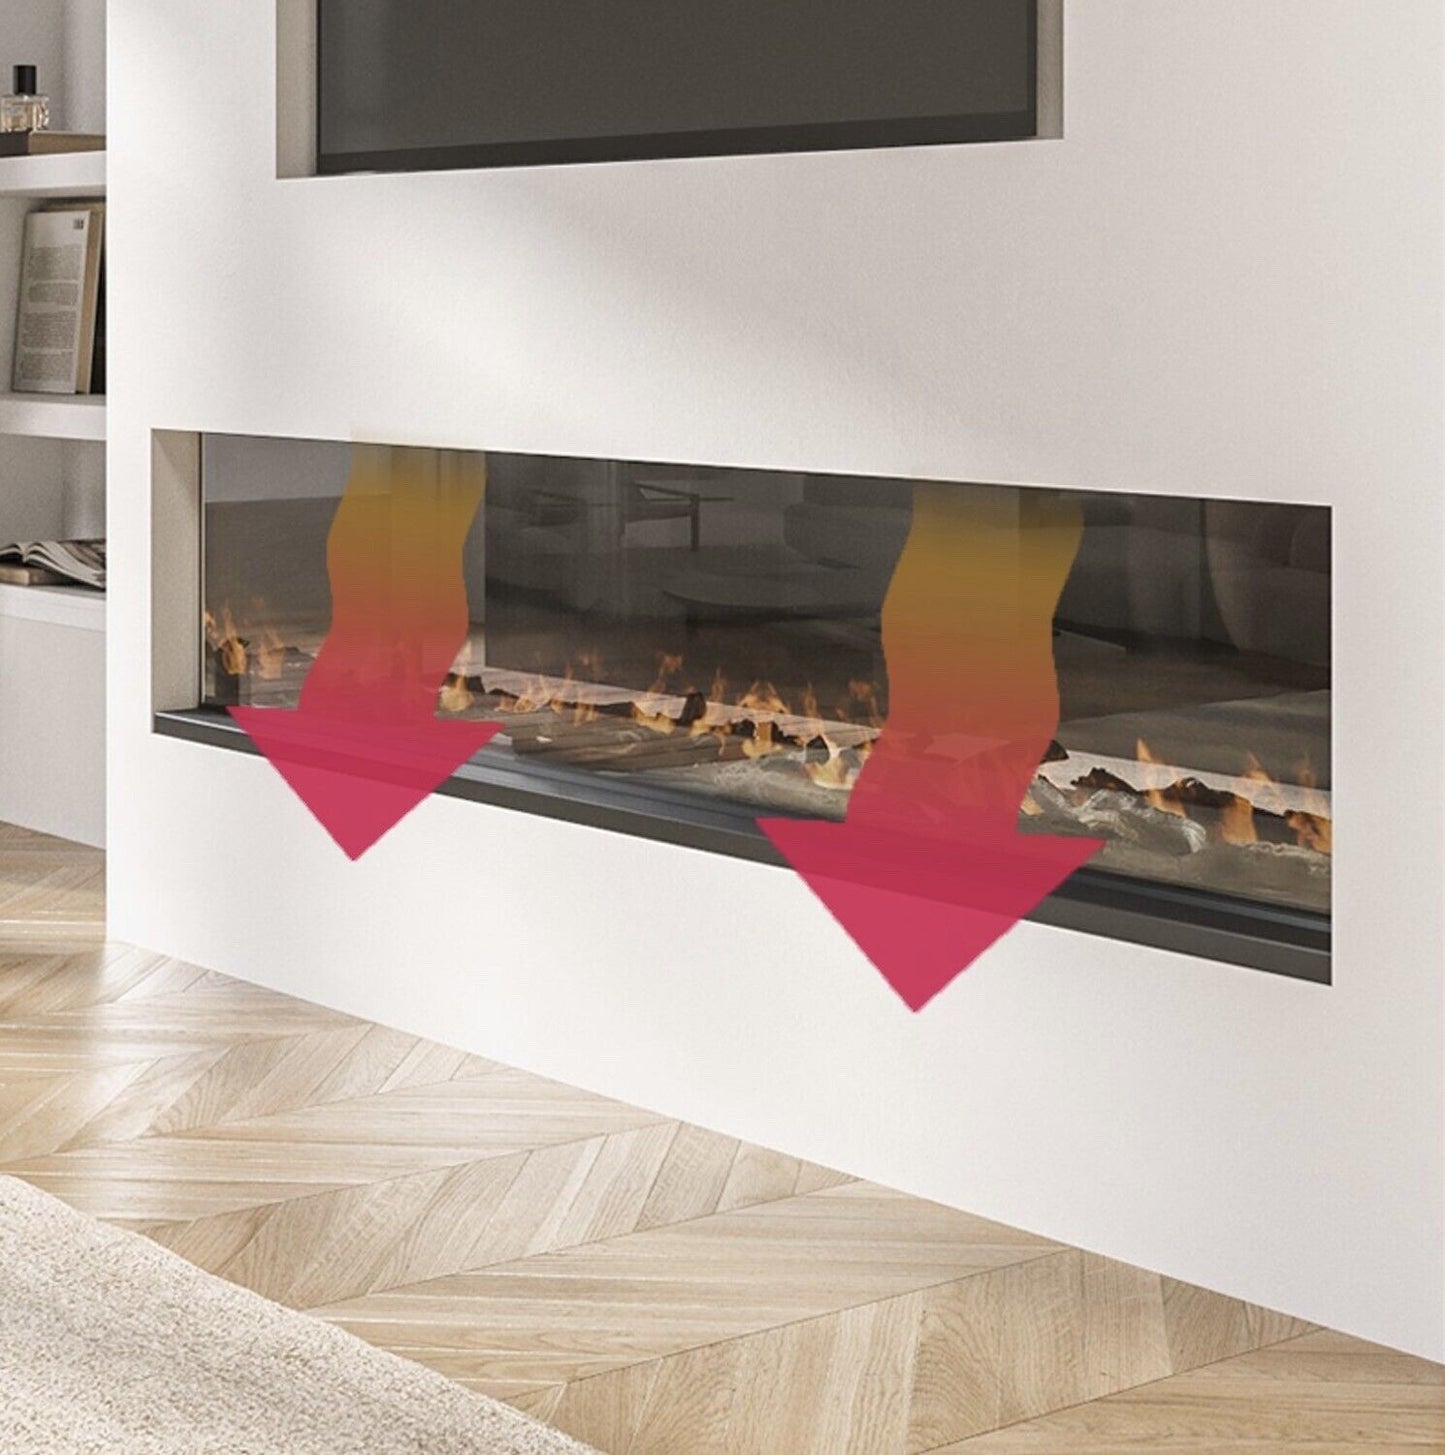 Electric Fire Media Wall Inset with LED Flames